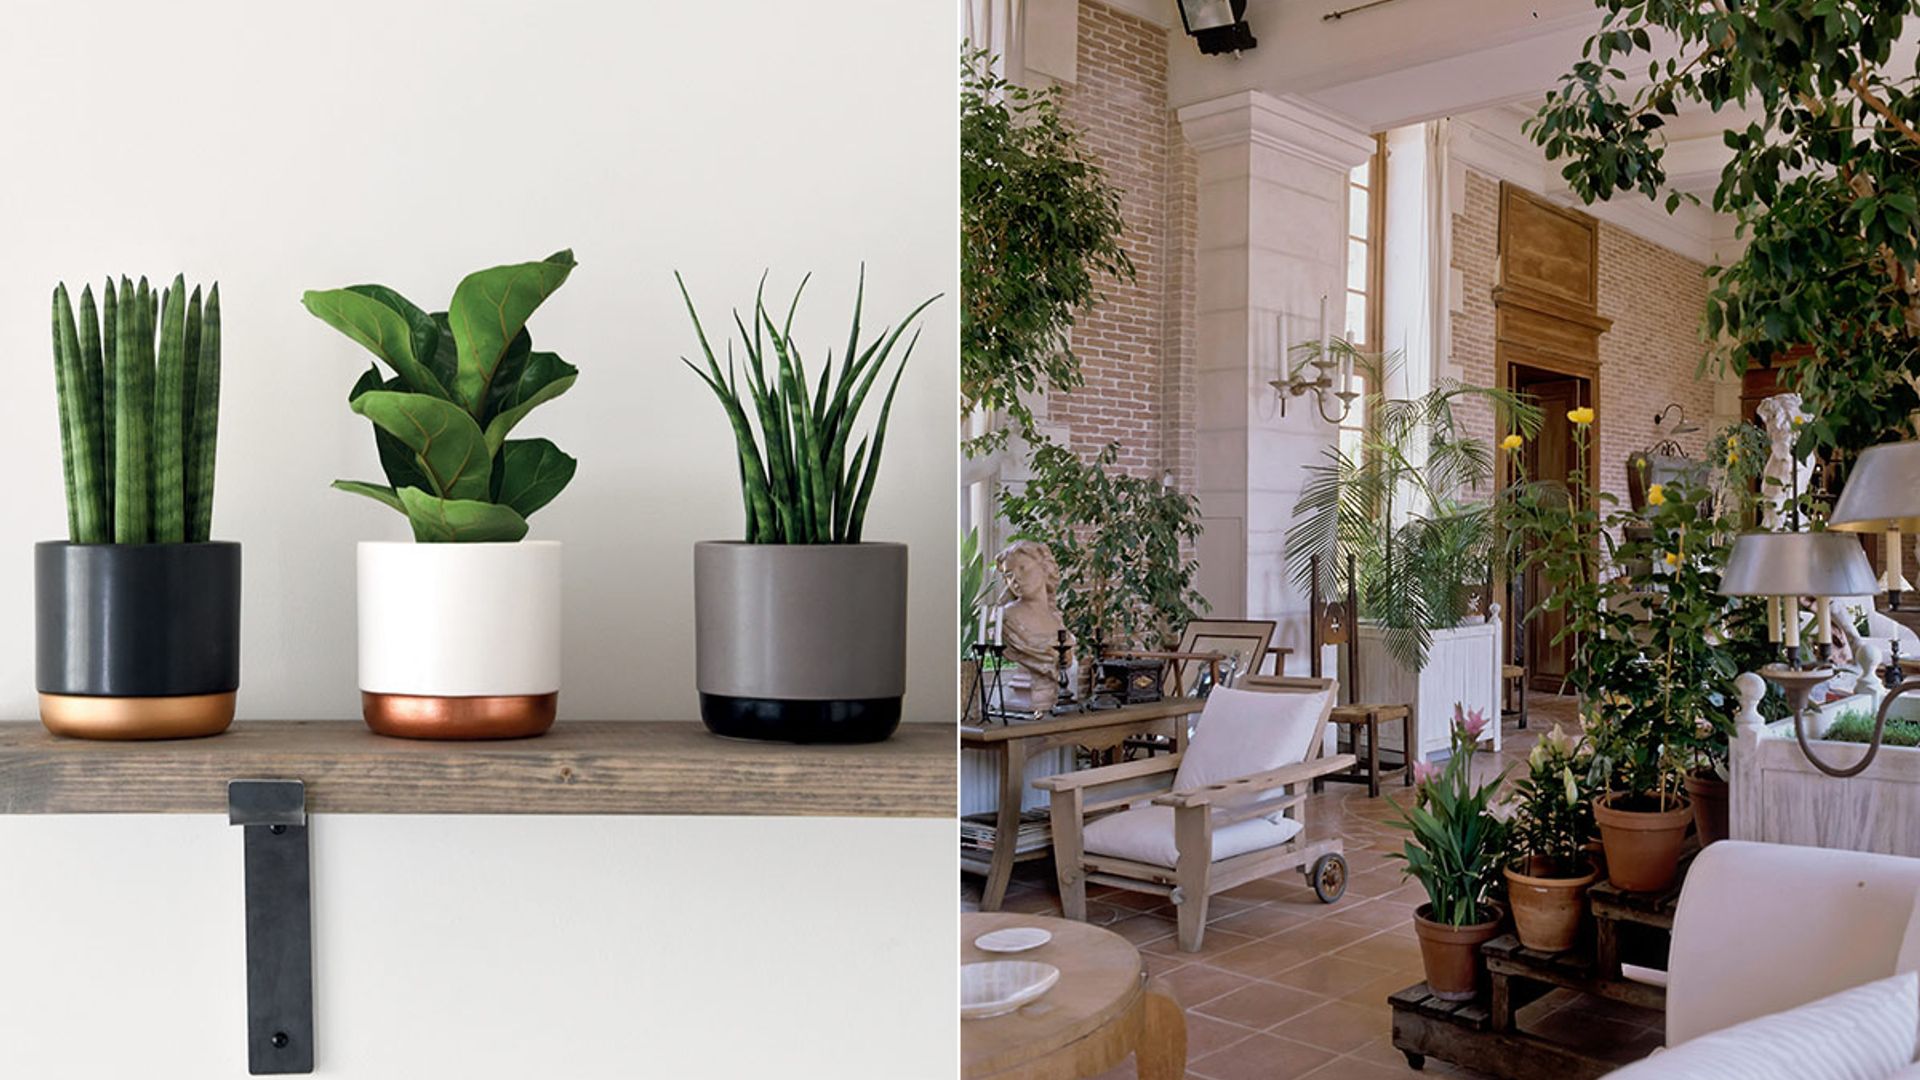 Best plants and gardening accessories to turn your home office into a green oasis